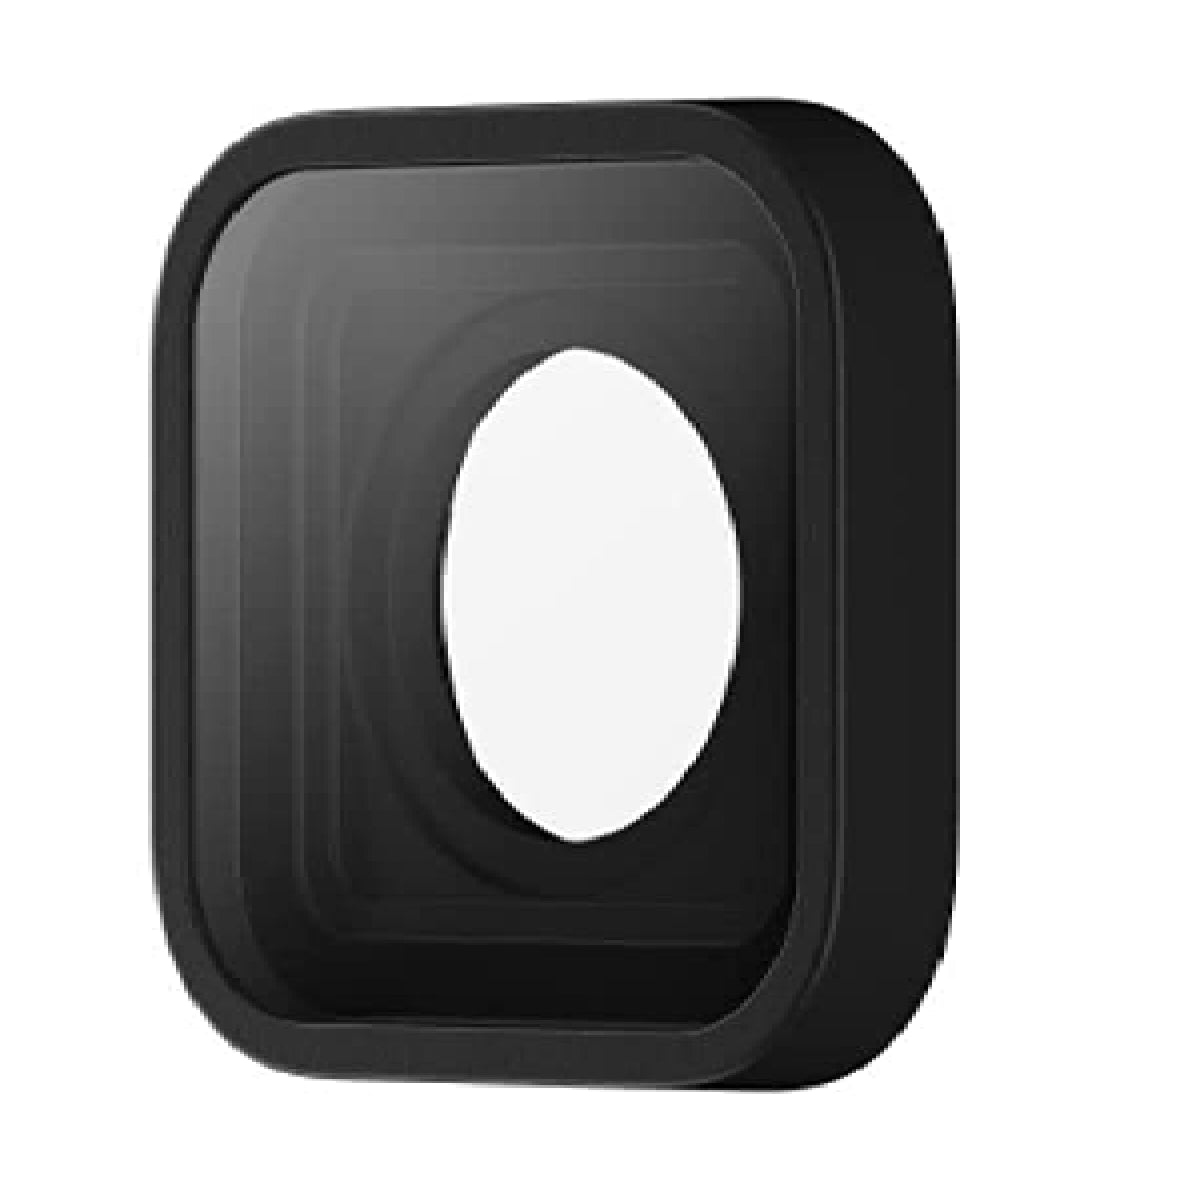 GoPro Hero 9/10 Protective Lens Replacement